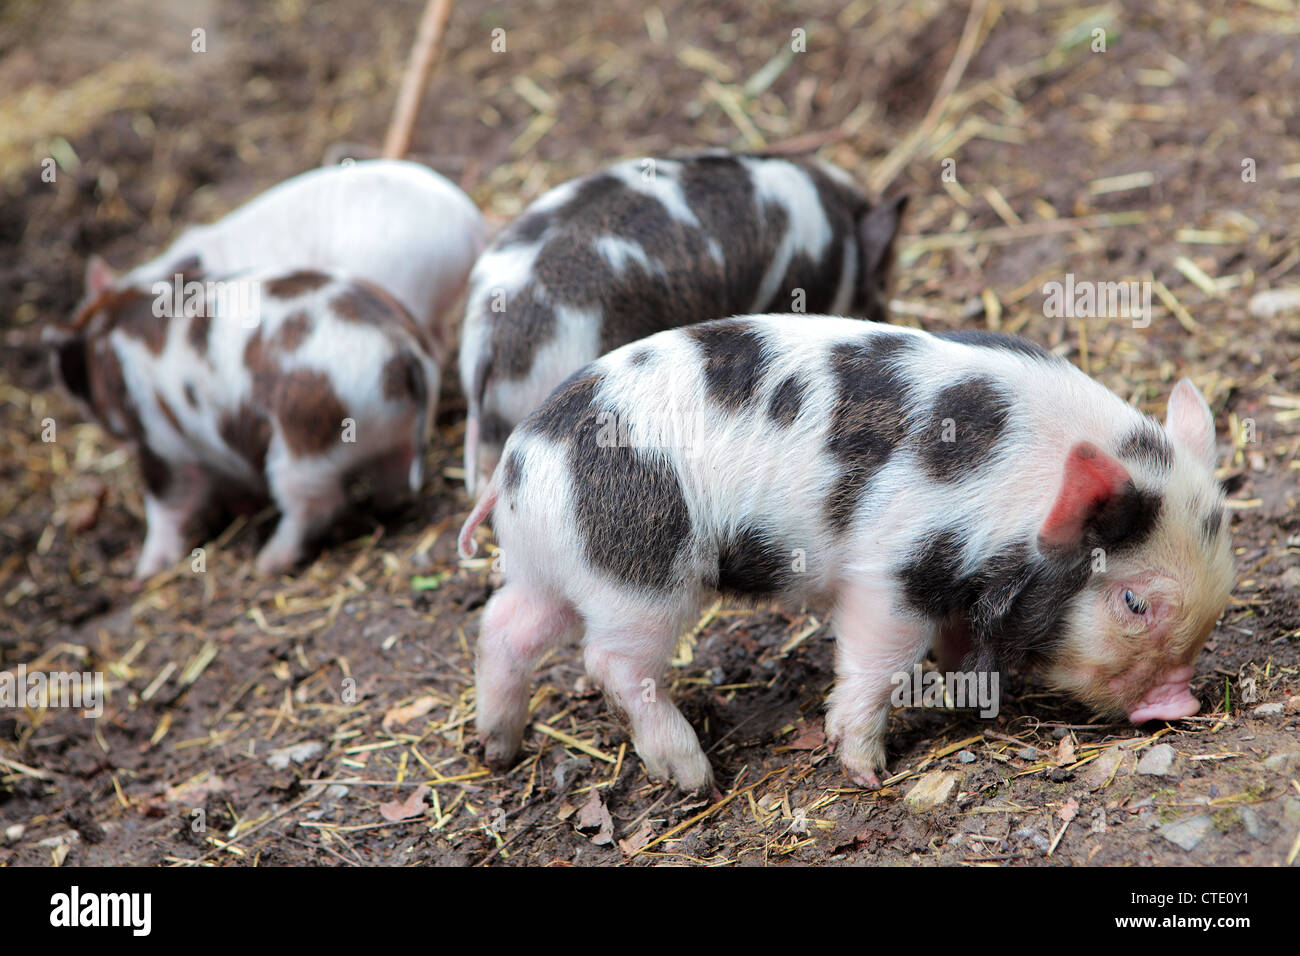 Small group of rare breed Kune Kune piglets Stock Photo